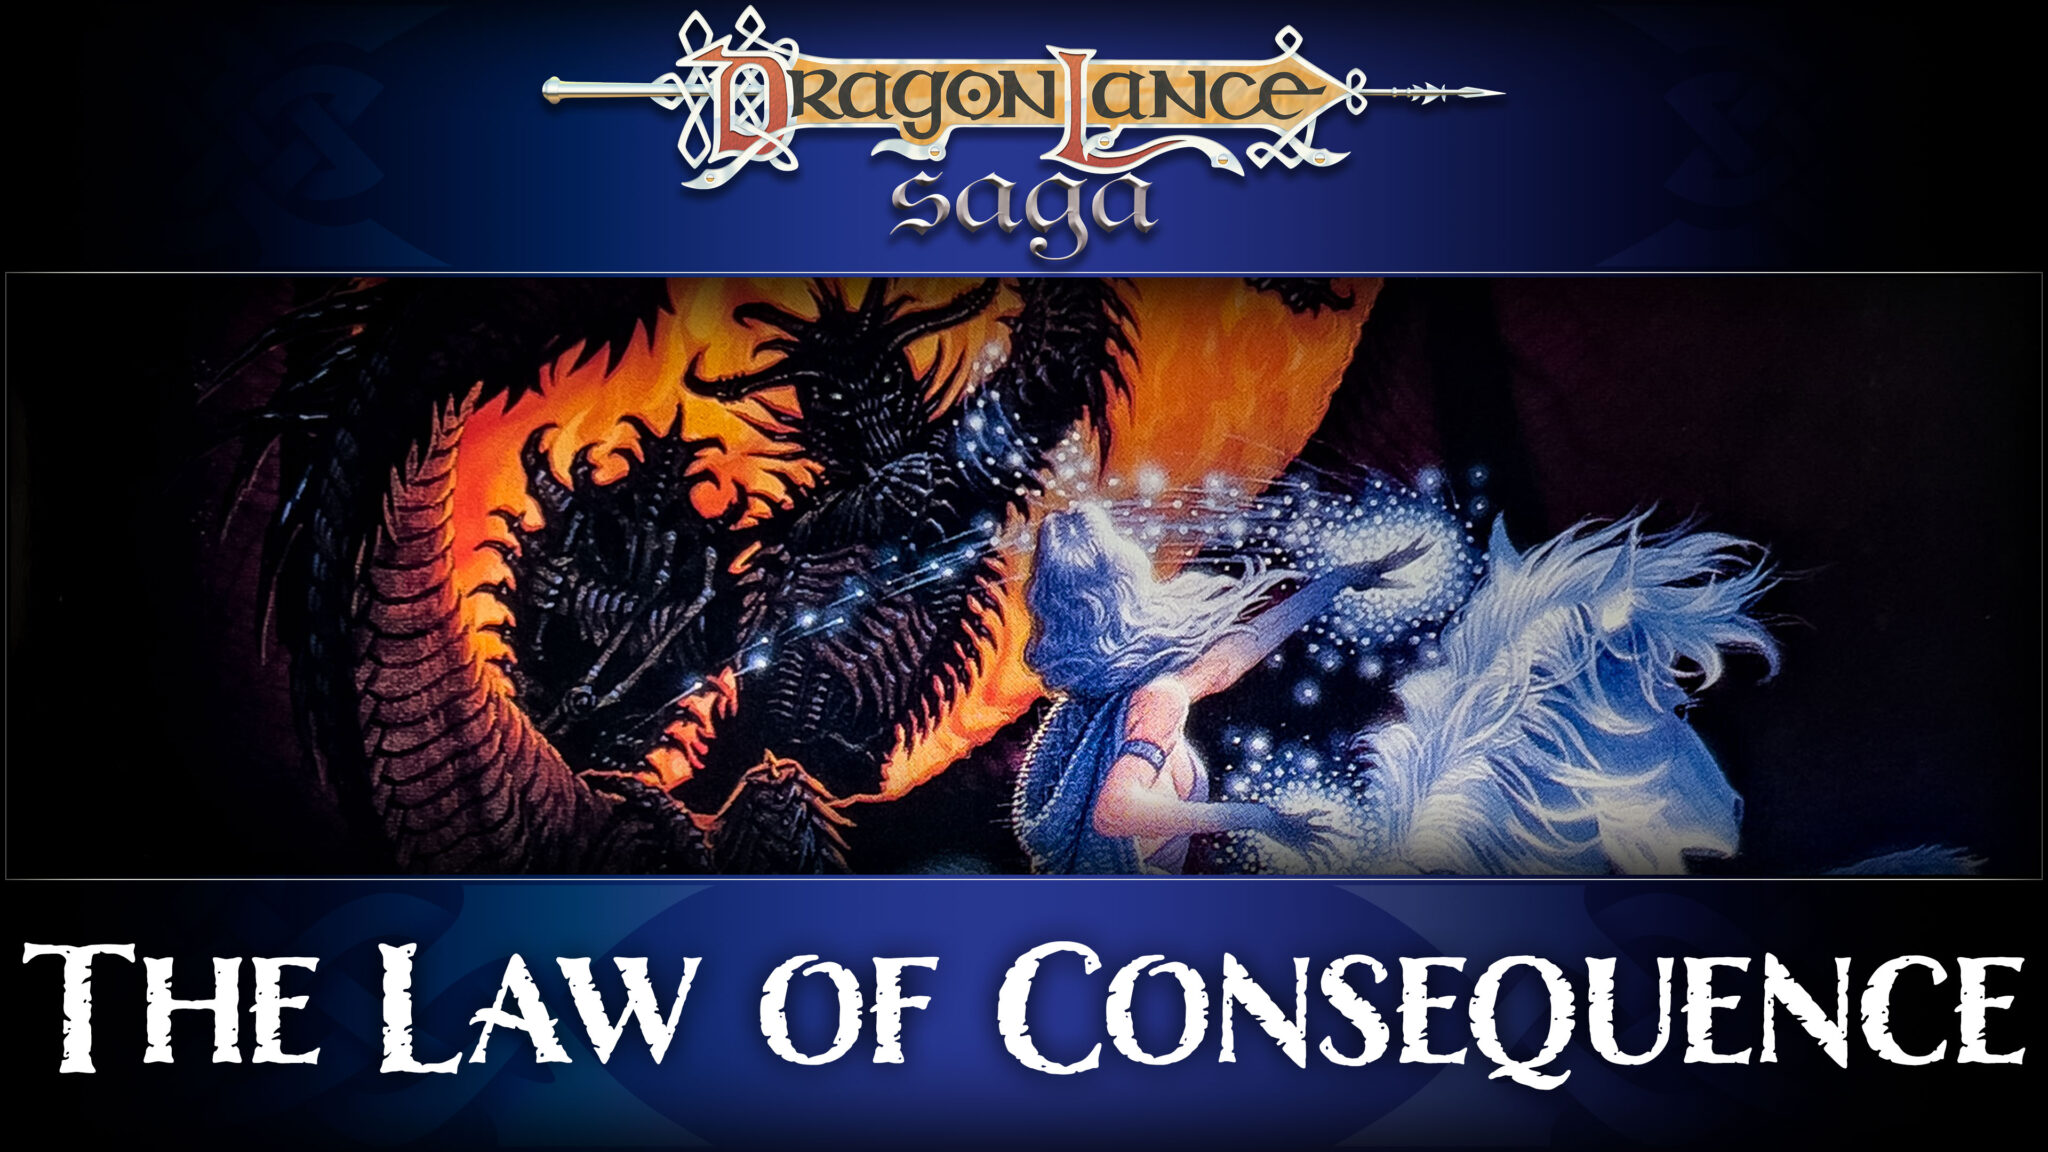 The Law of Consequence - DLSaga